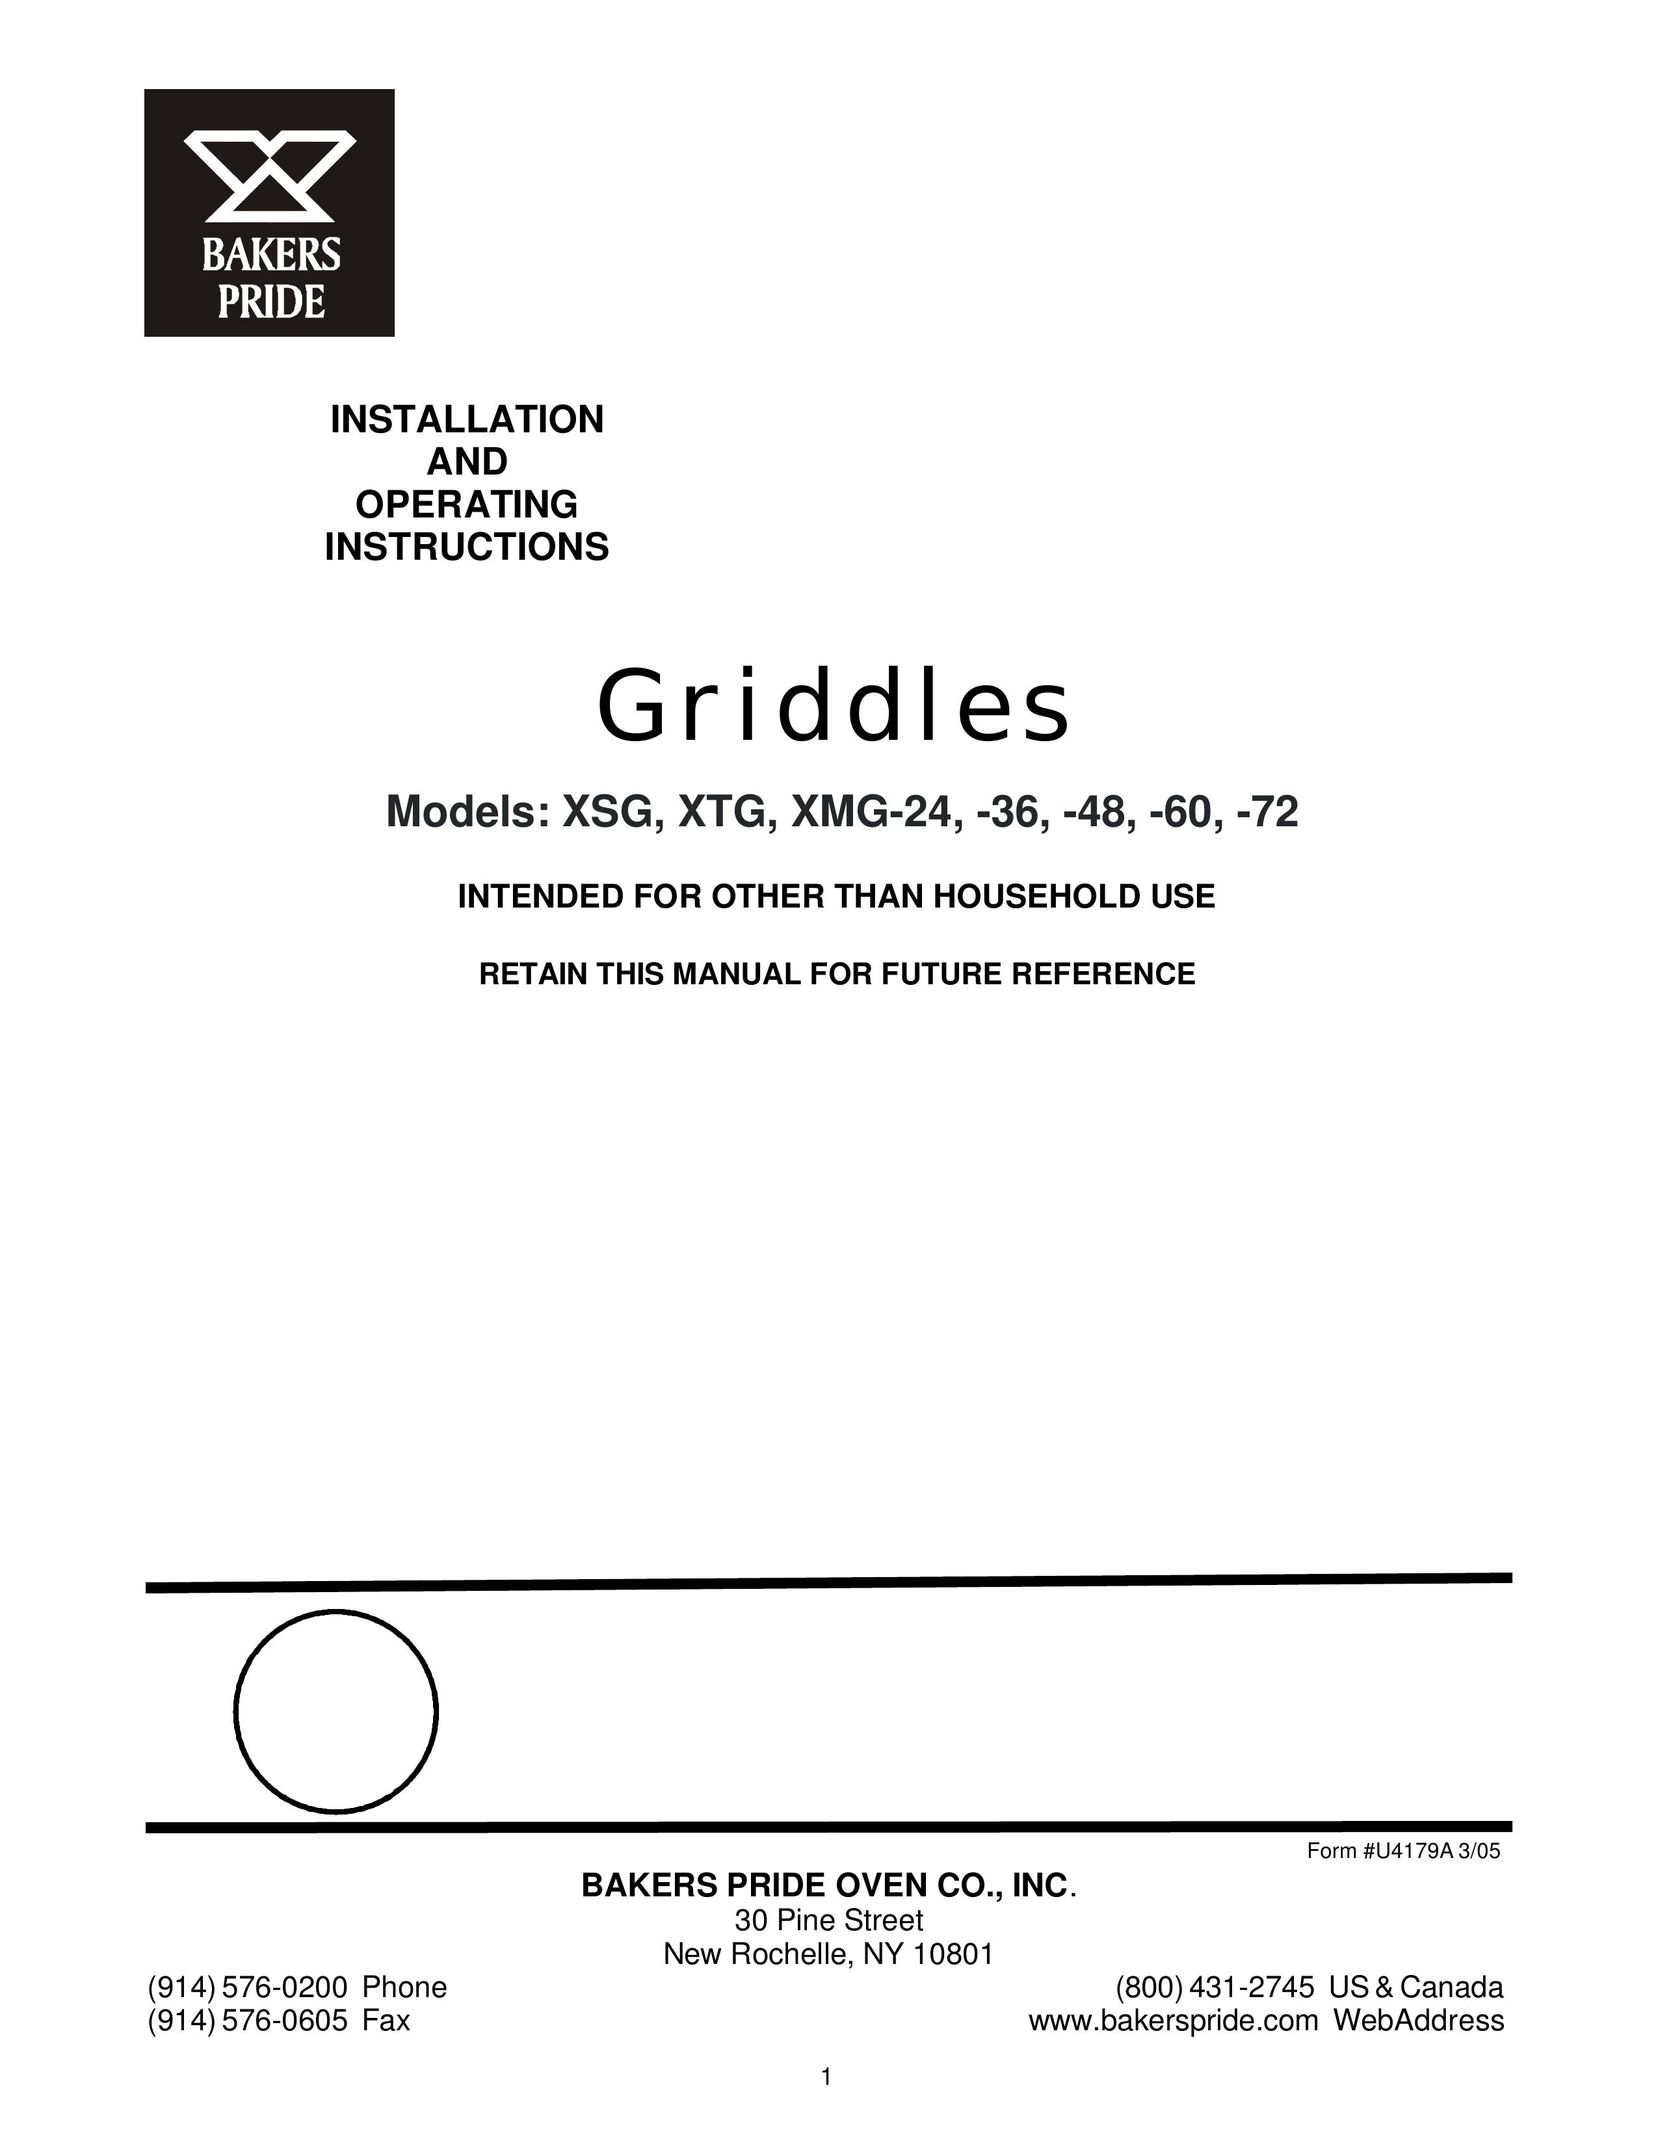 Bakers Pride Oven XSG Griddle User Manual